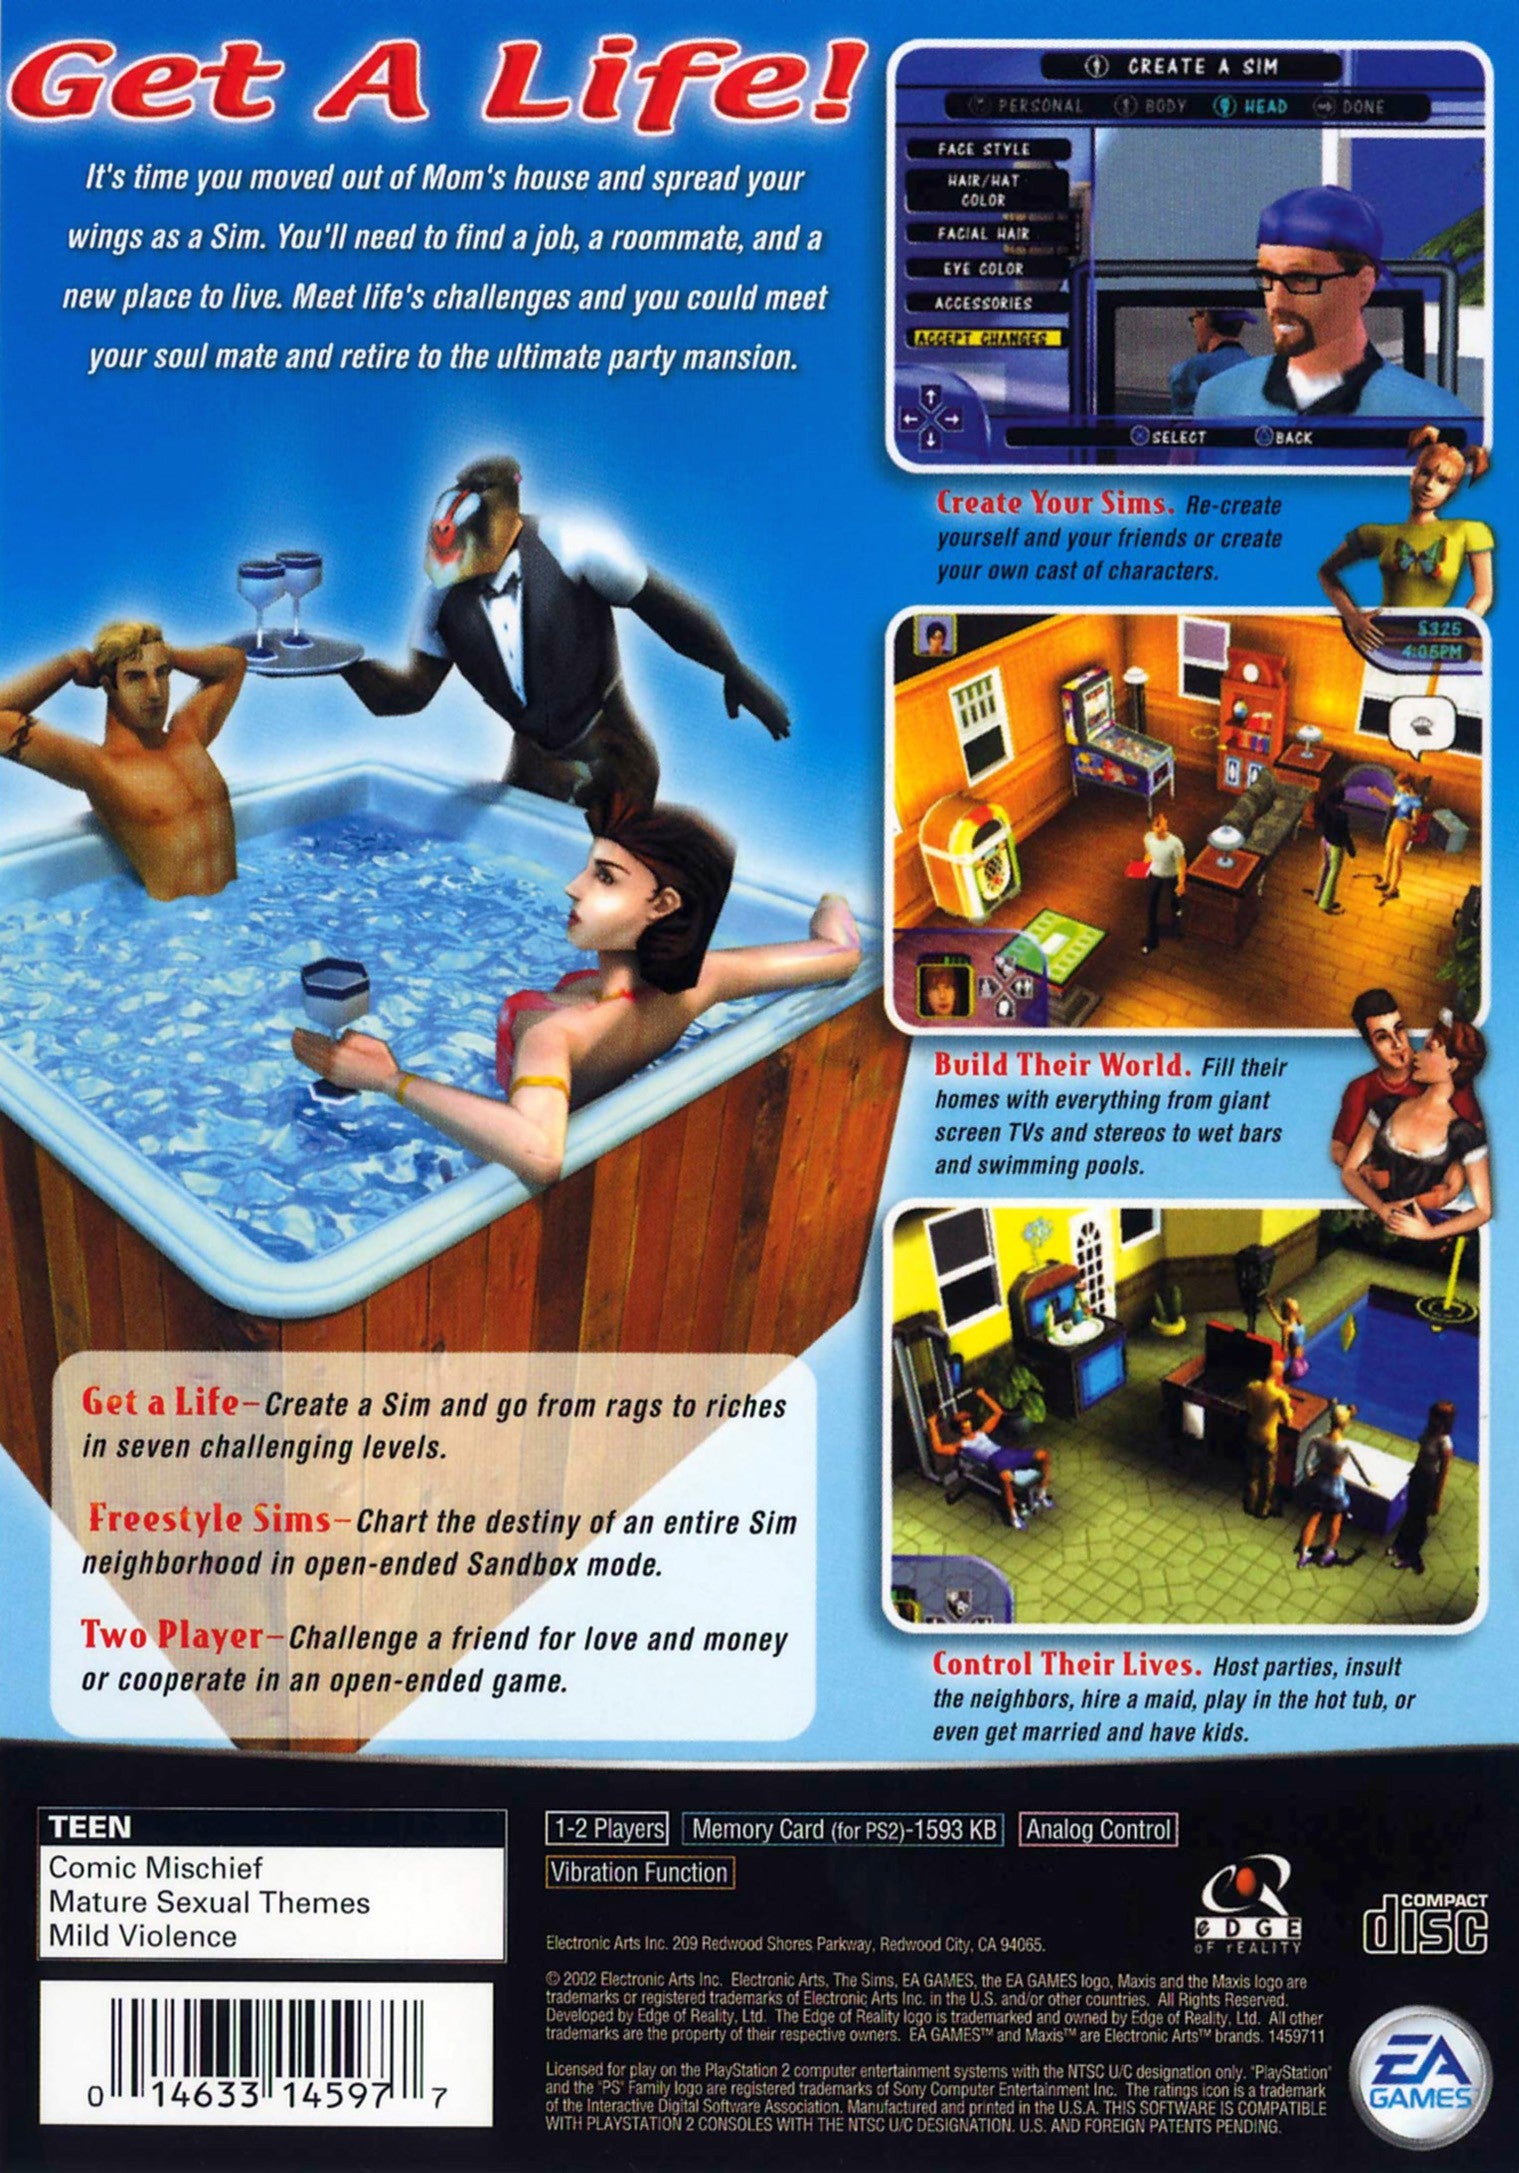 The Sims - PlayStation 2 (PS2) Game